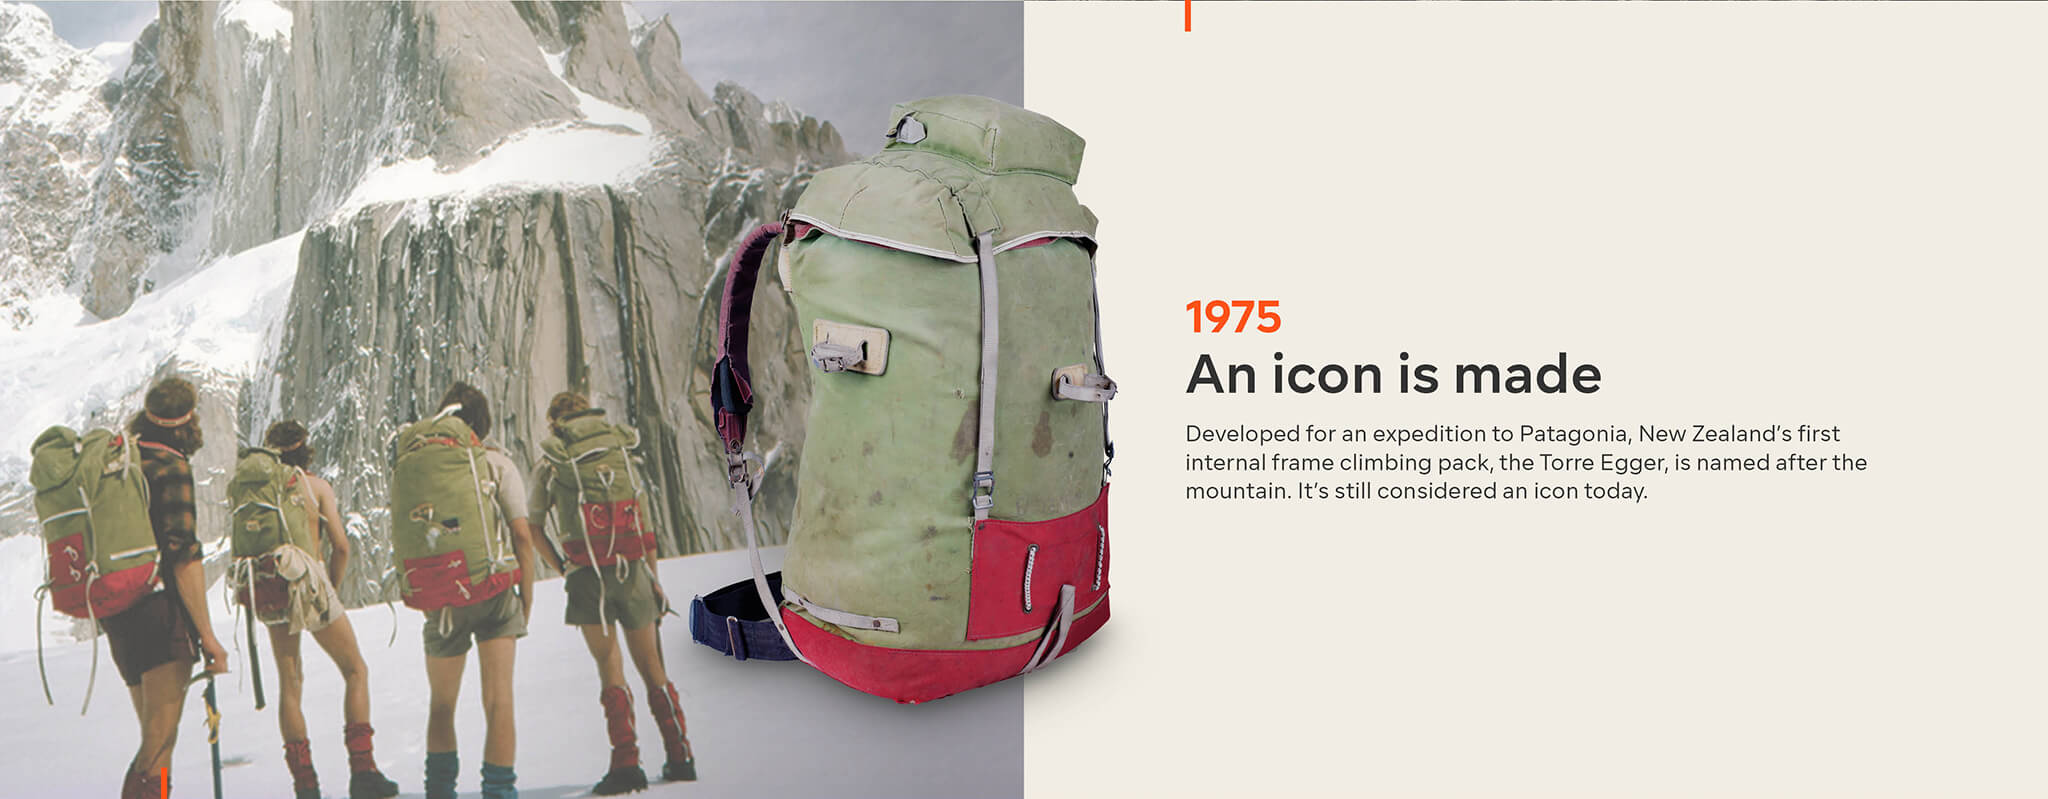 A lifetime of adventure with Quote: My goal was to make the best backpacks for New Zealand's Mountains - Bruce McIntyre, Macpac founder